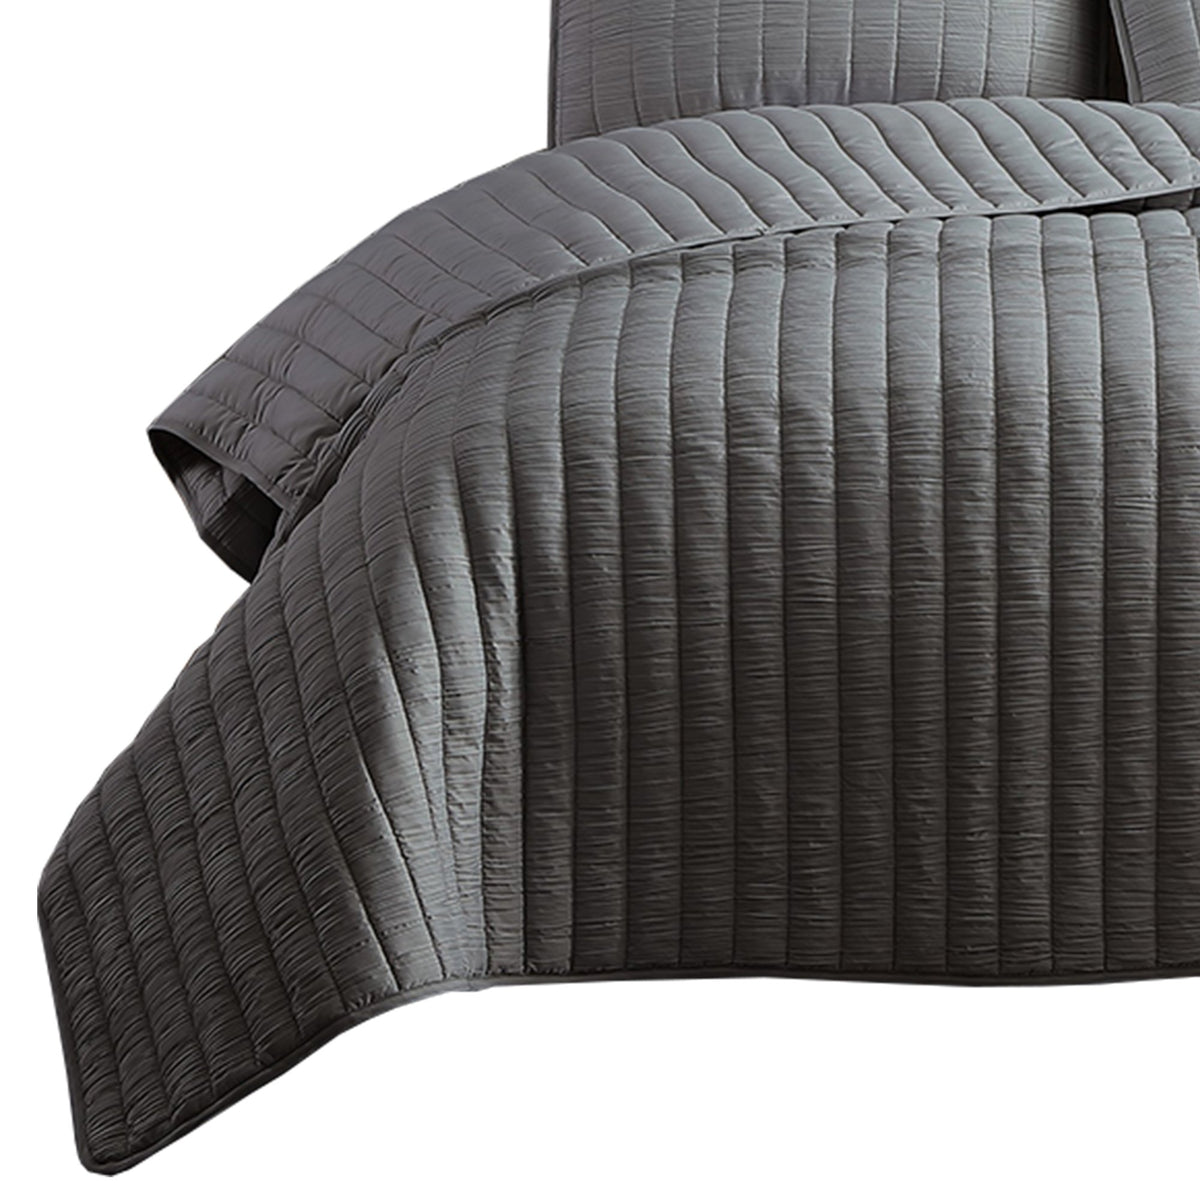 3 Piece Crinkles King Size Coverlet Set with Vertical Stitching, Gray - BM225245